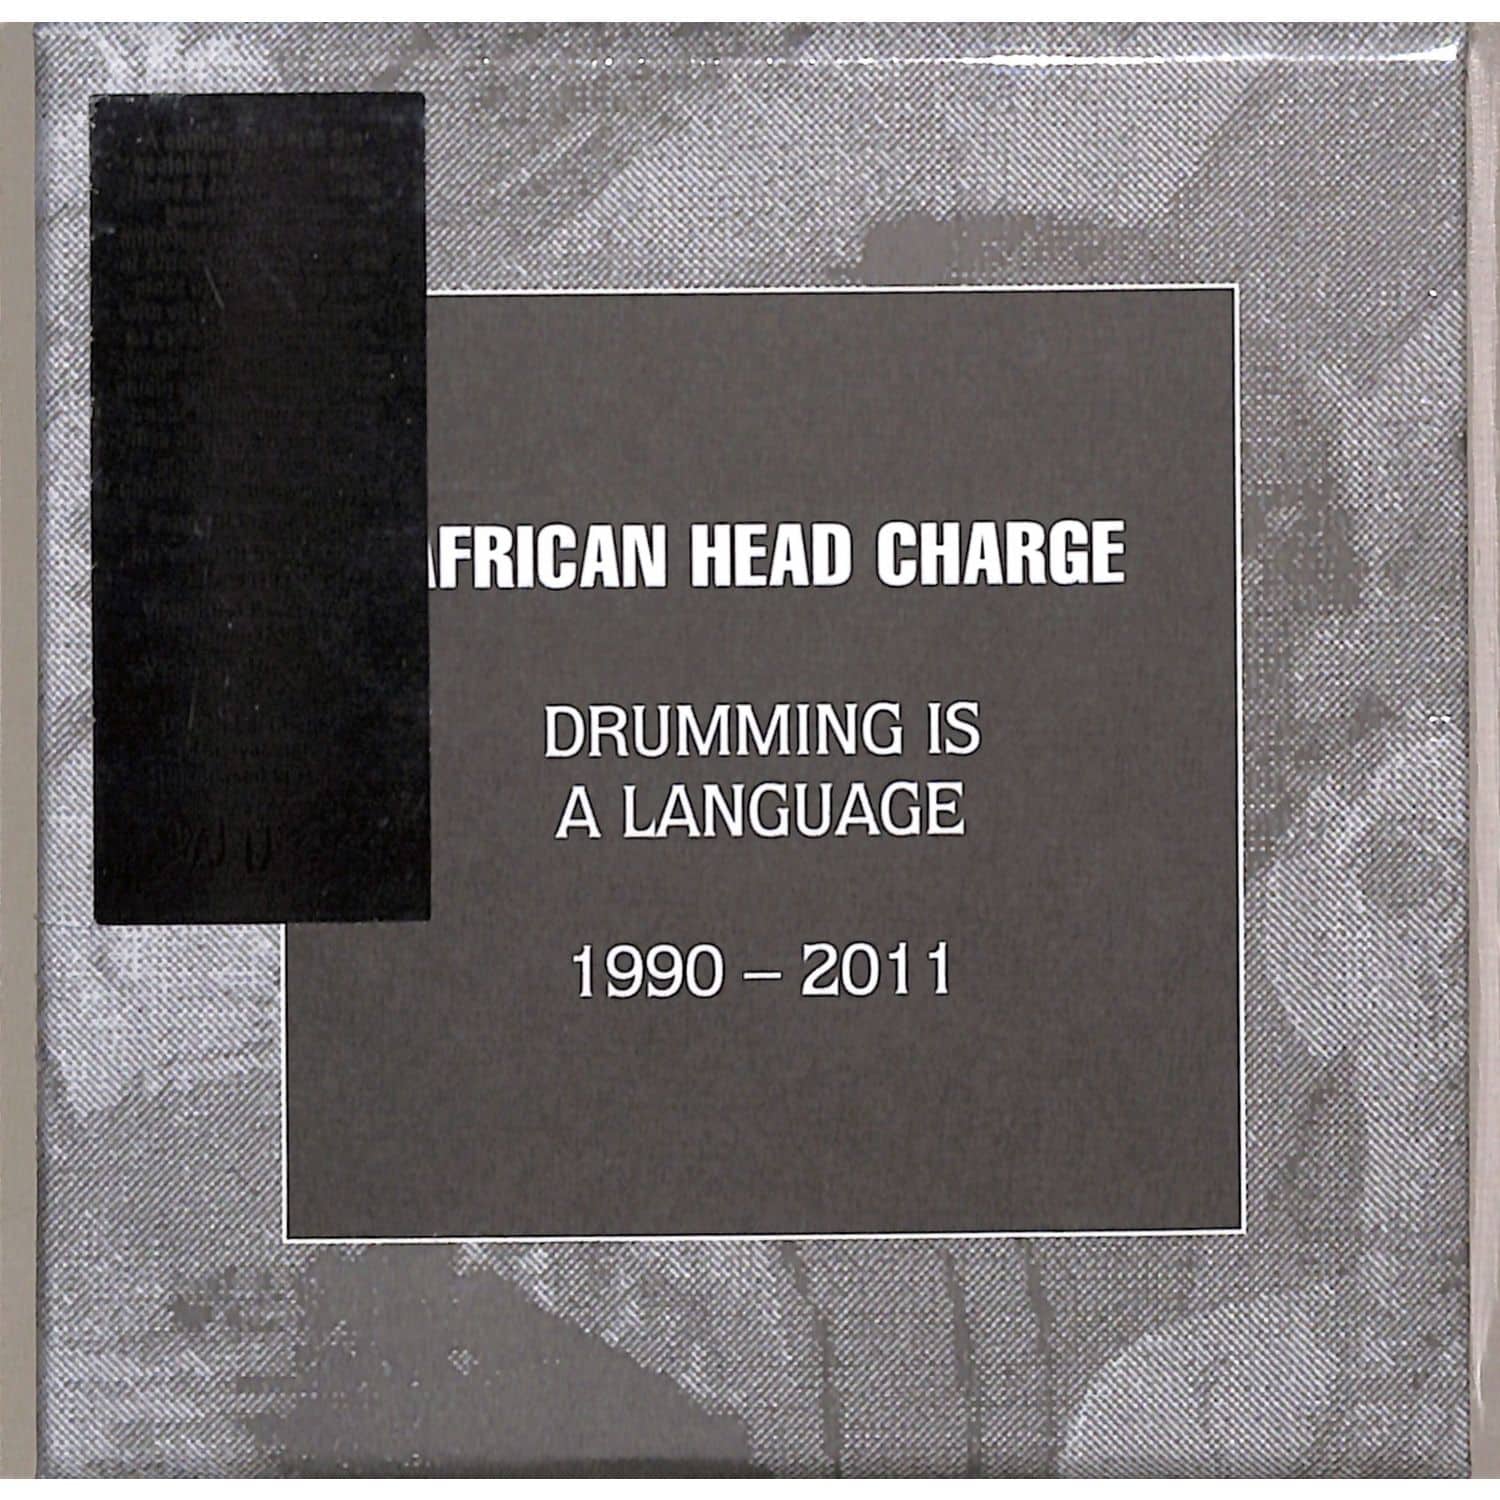 African Head Charge - DRUMMING IS A LANGUAGE 1990-2011 